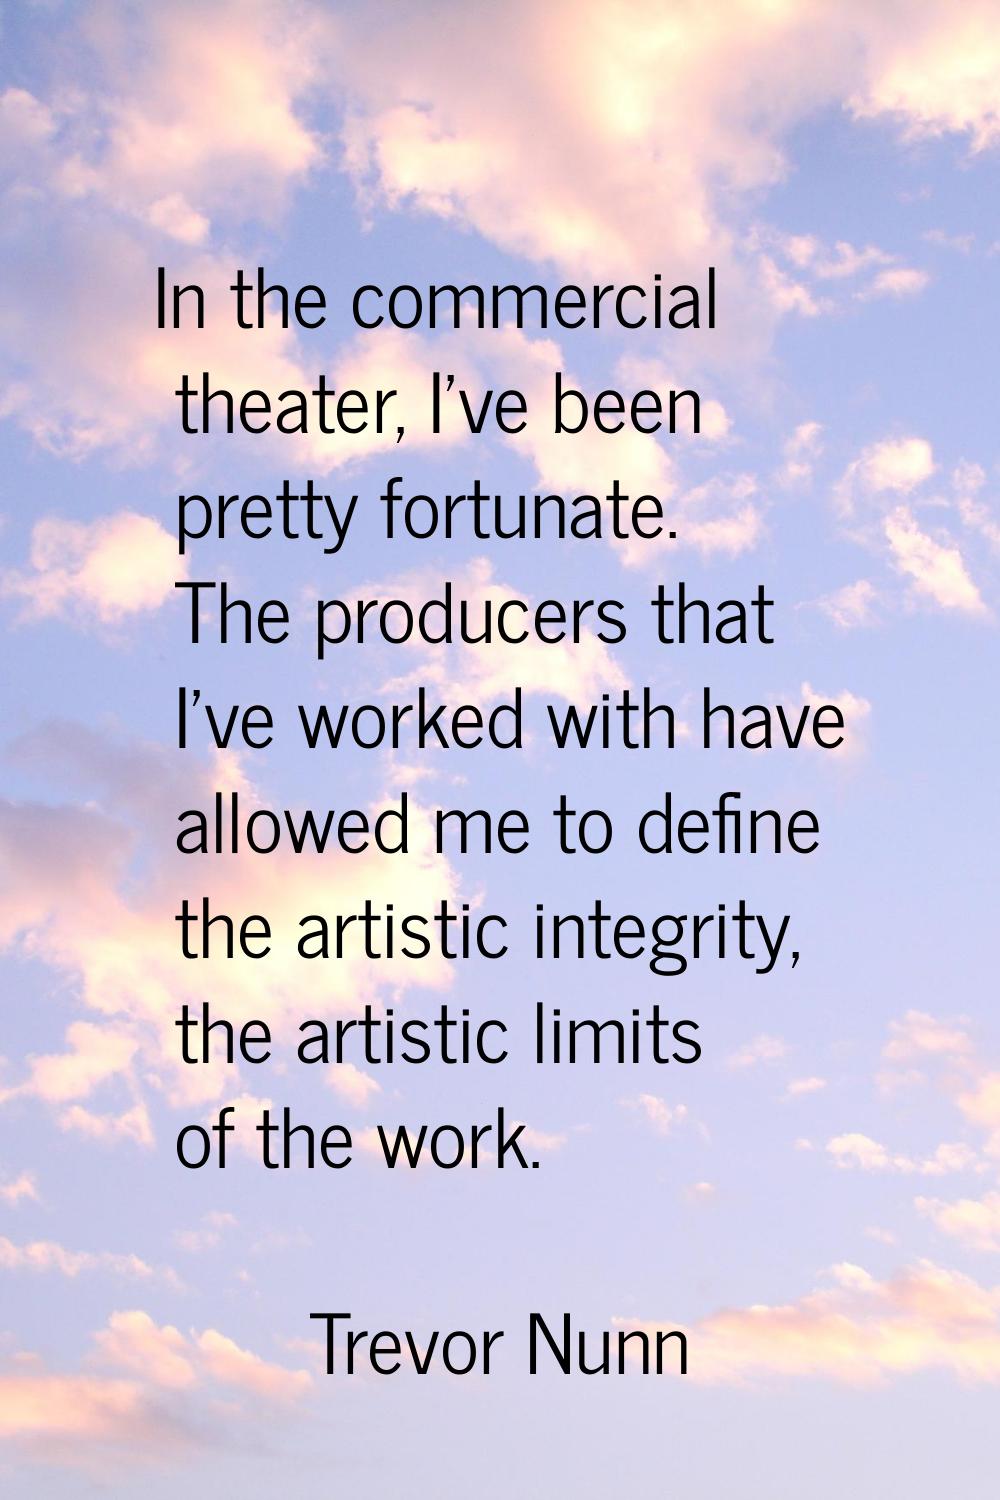 In the commercial theater, I've been pretty fortunate. The producers that I've worked with have all